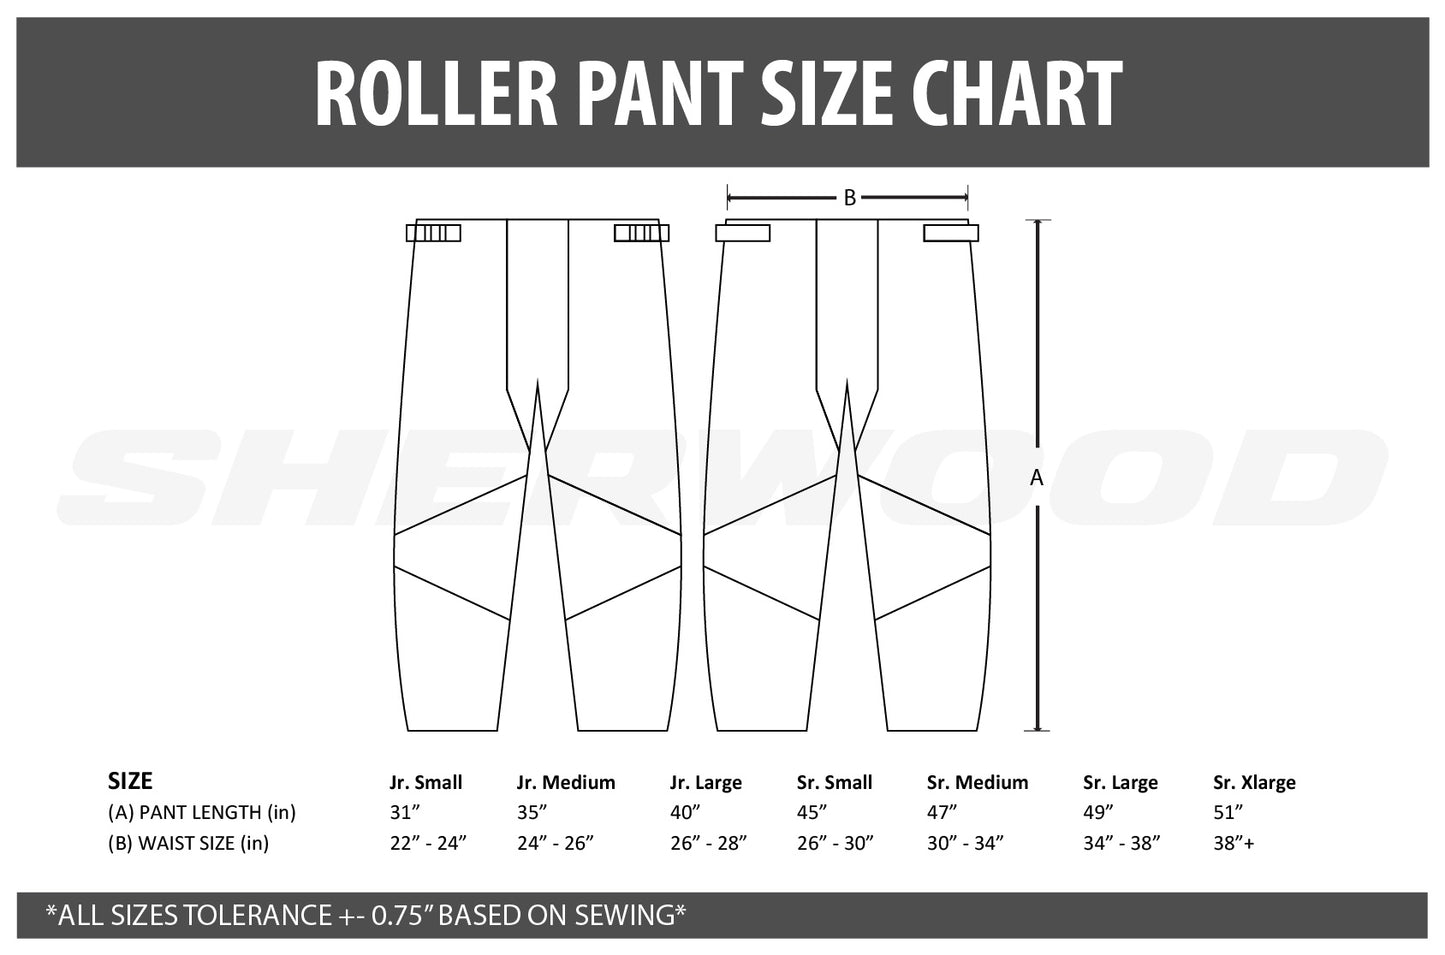 Sublimated Inline Hockey Pants-  Your Design